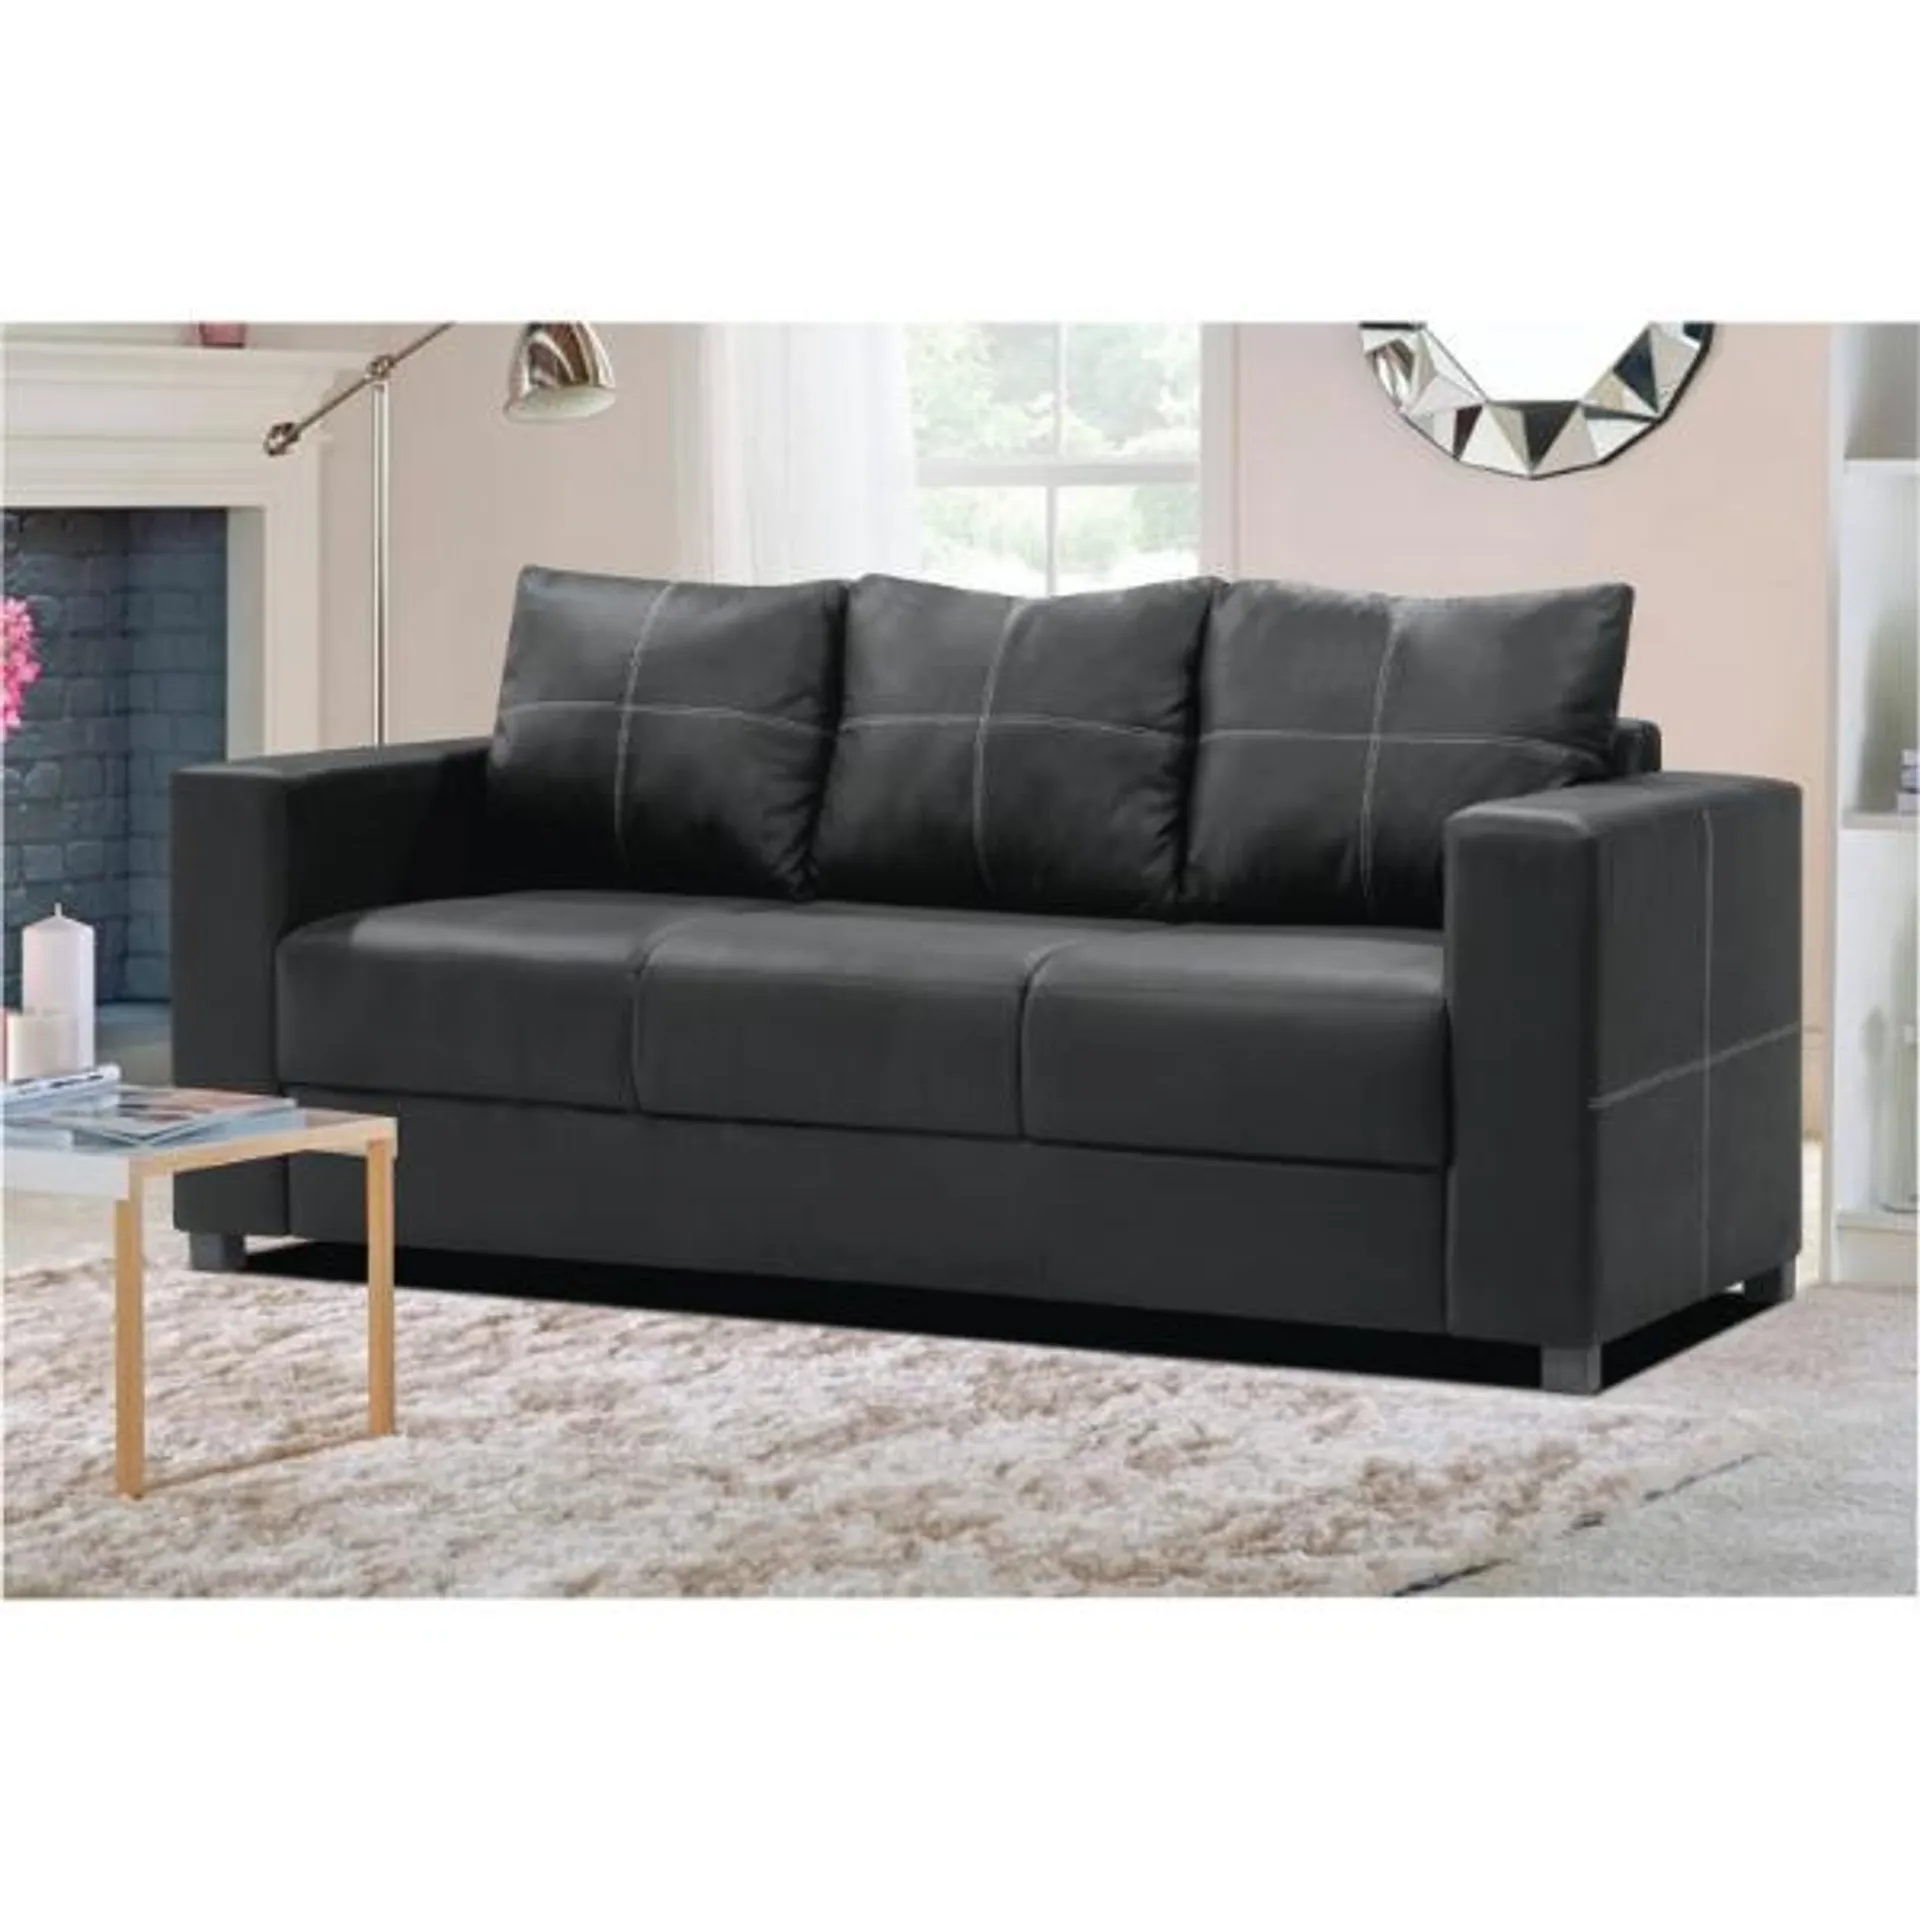 Phillip 3 Seater Couch - Black